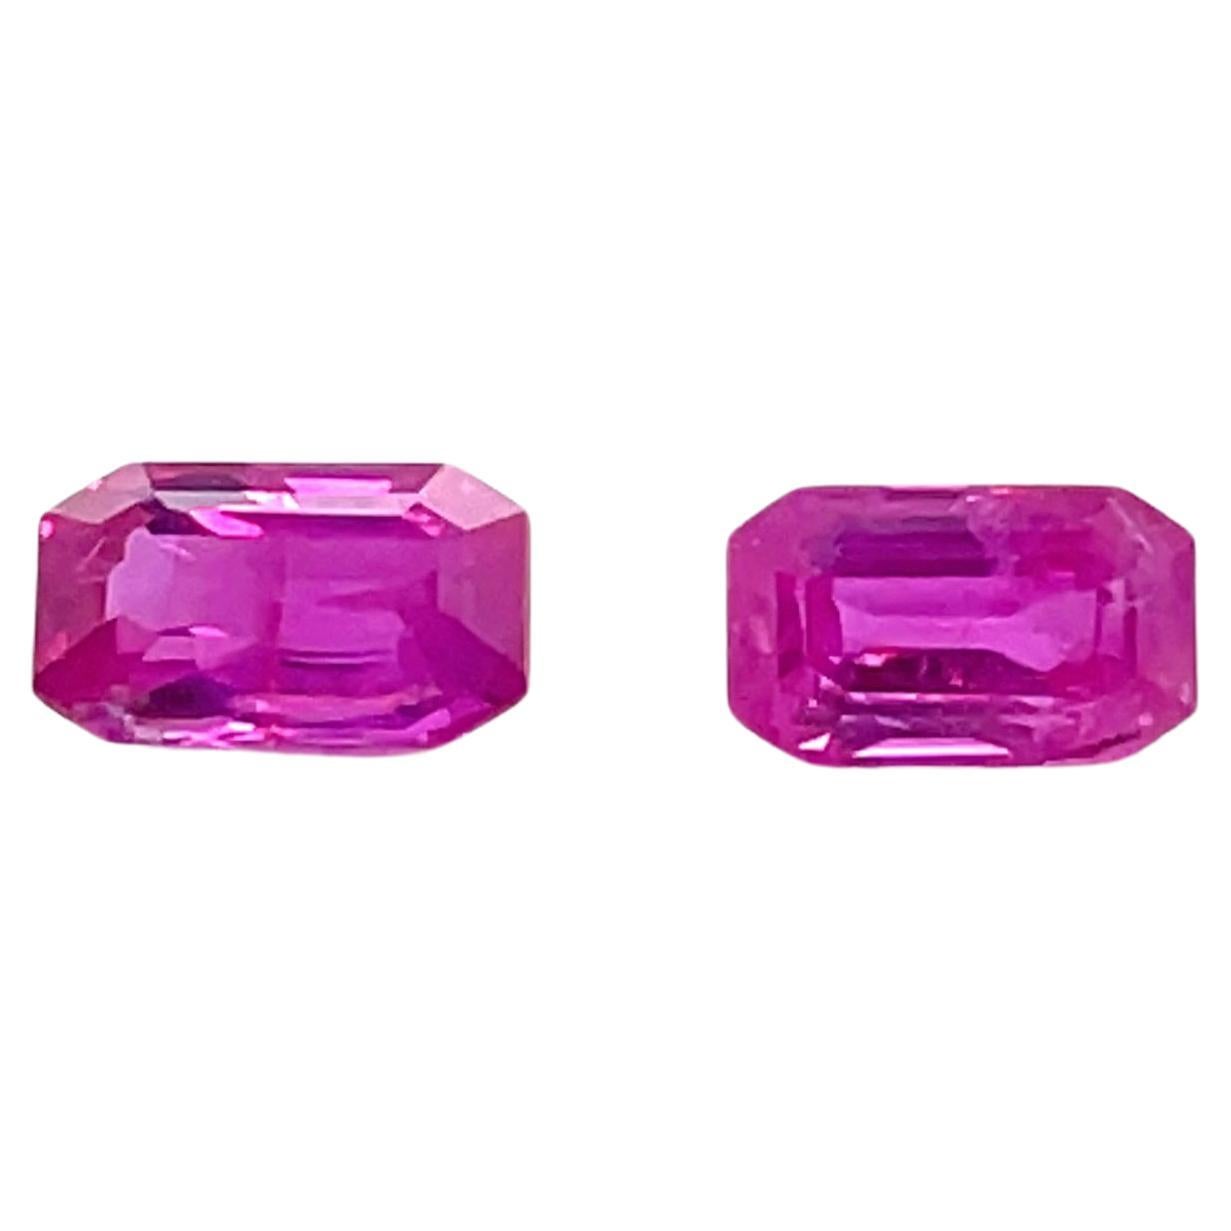 2 Rubies 2.22 Cts  For Sale